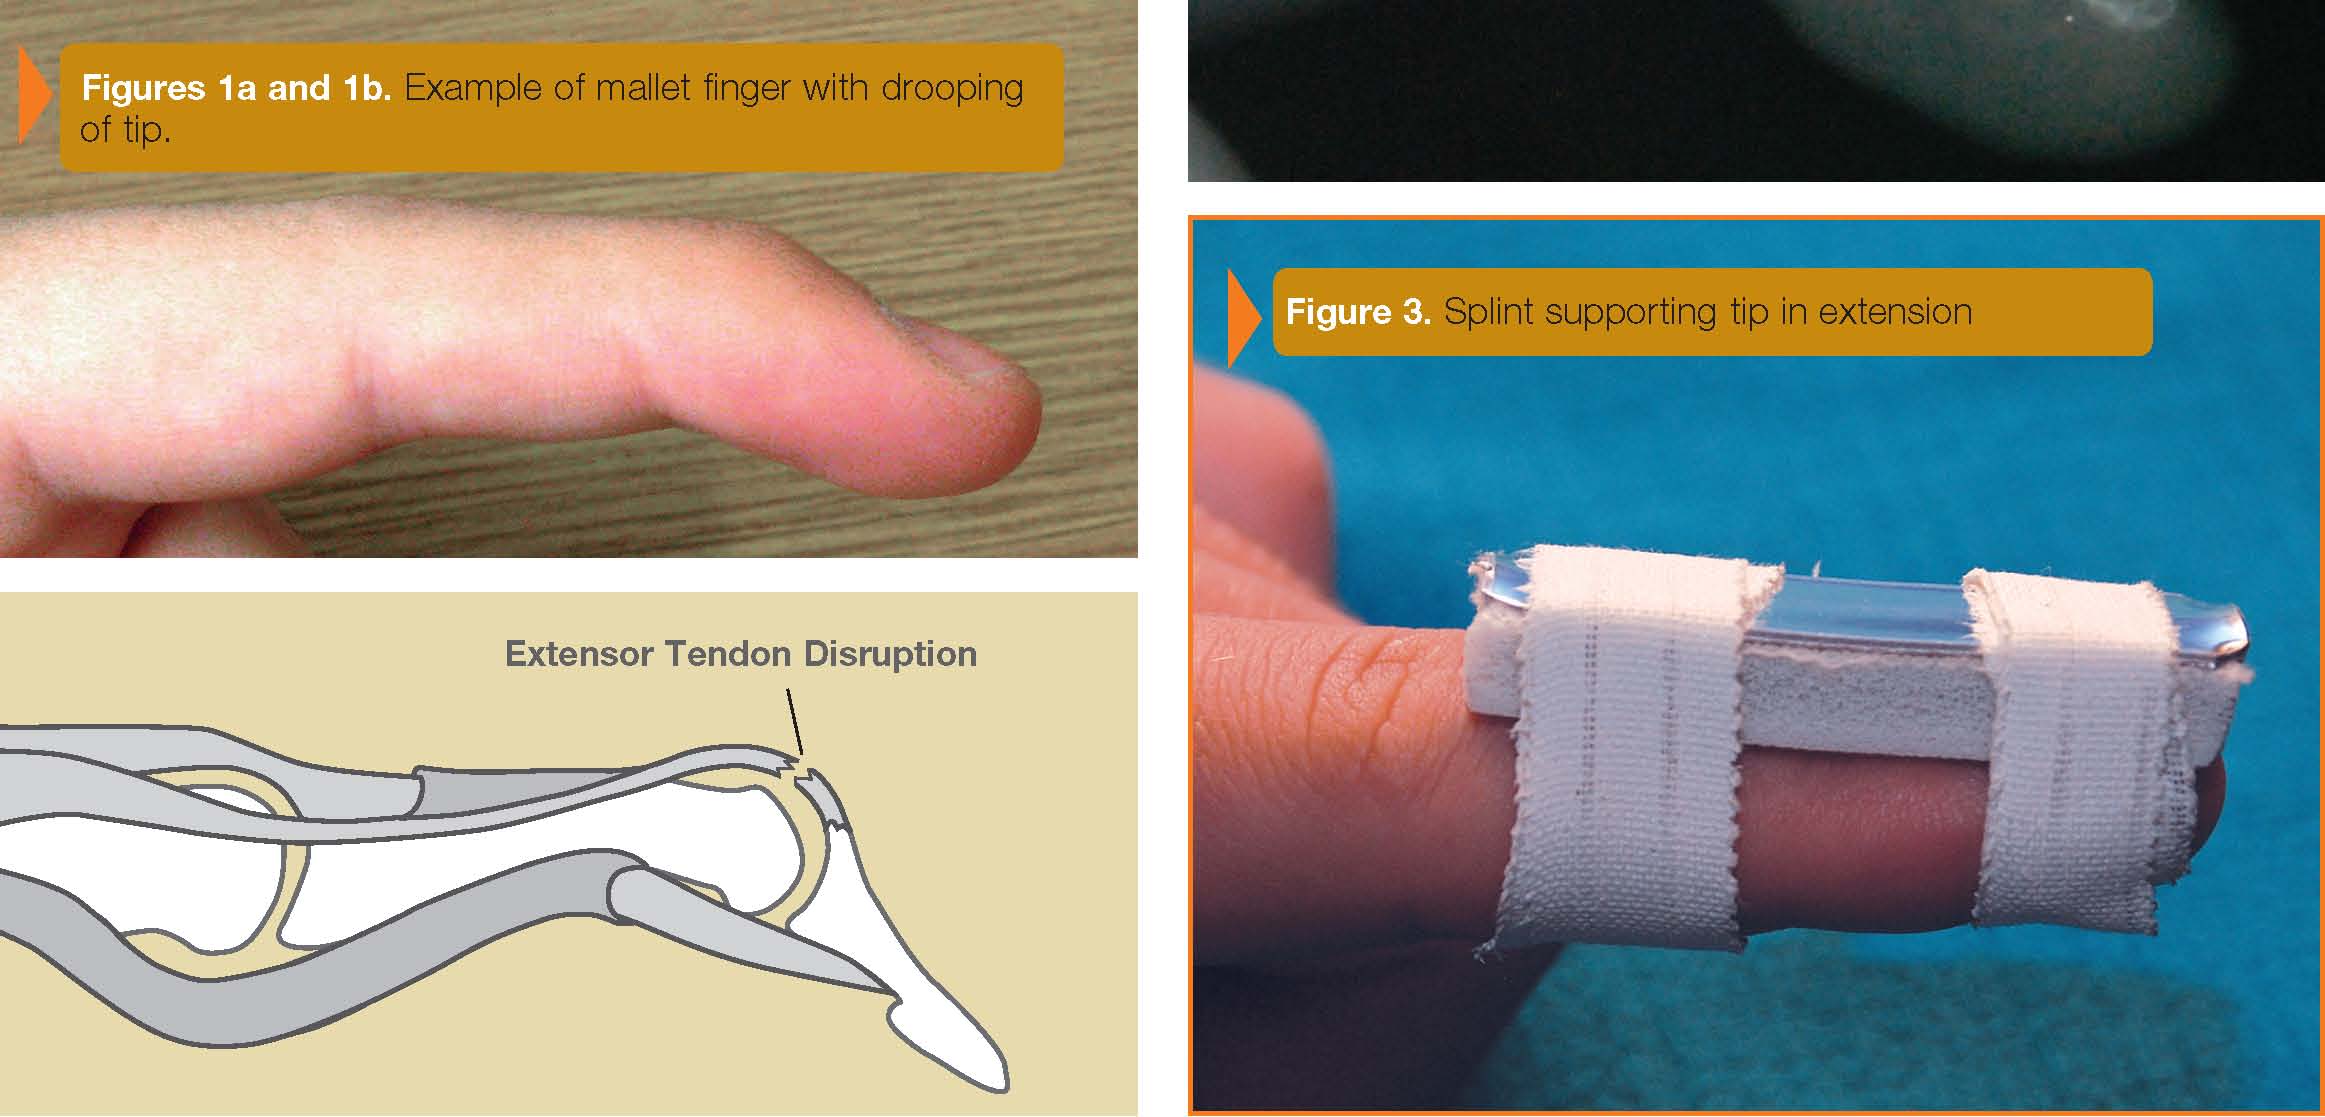 How long does it take for mallet finger to heal?